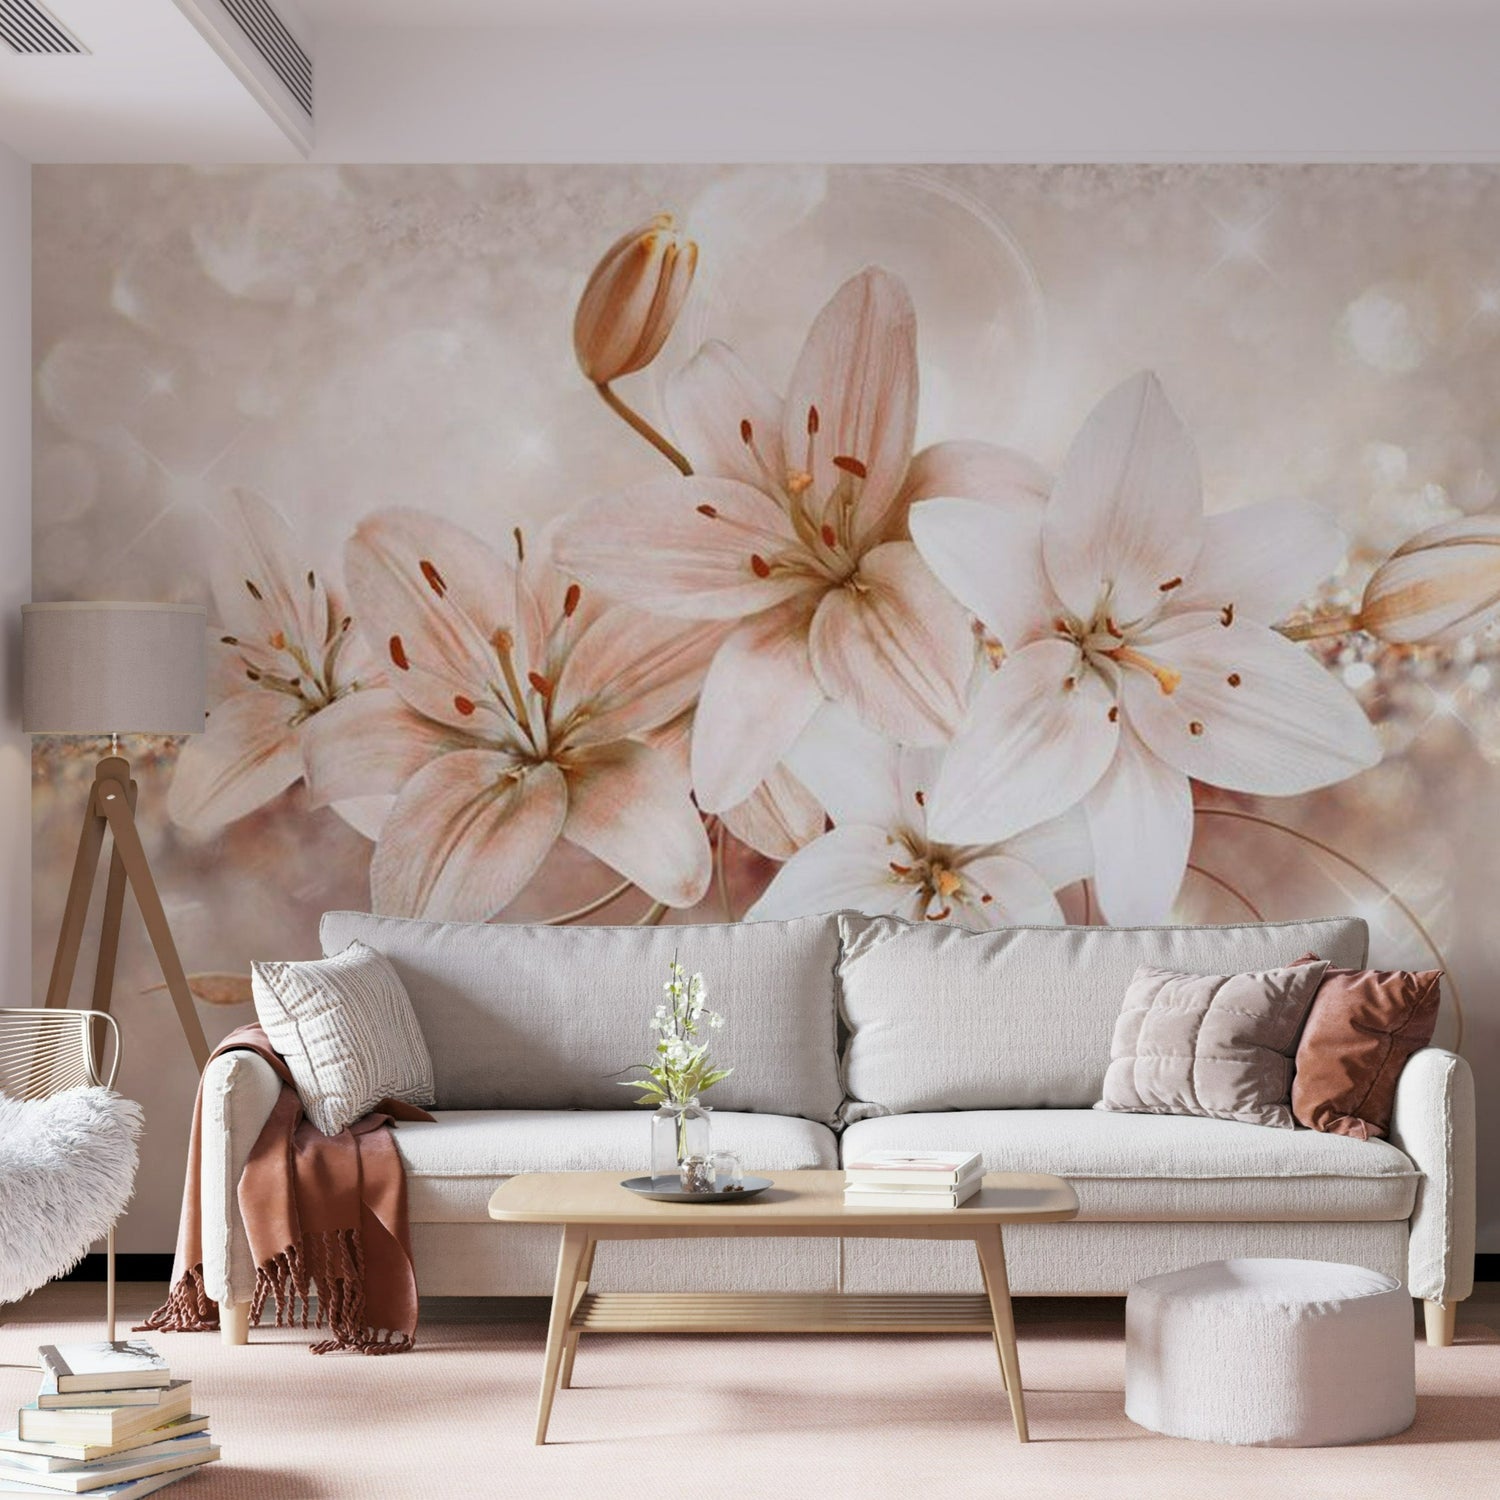 Peel & Stick Floral Wall Mural - Nymph's Bouquet - Removable Wall Decals